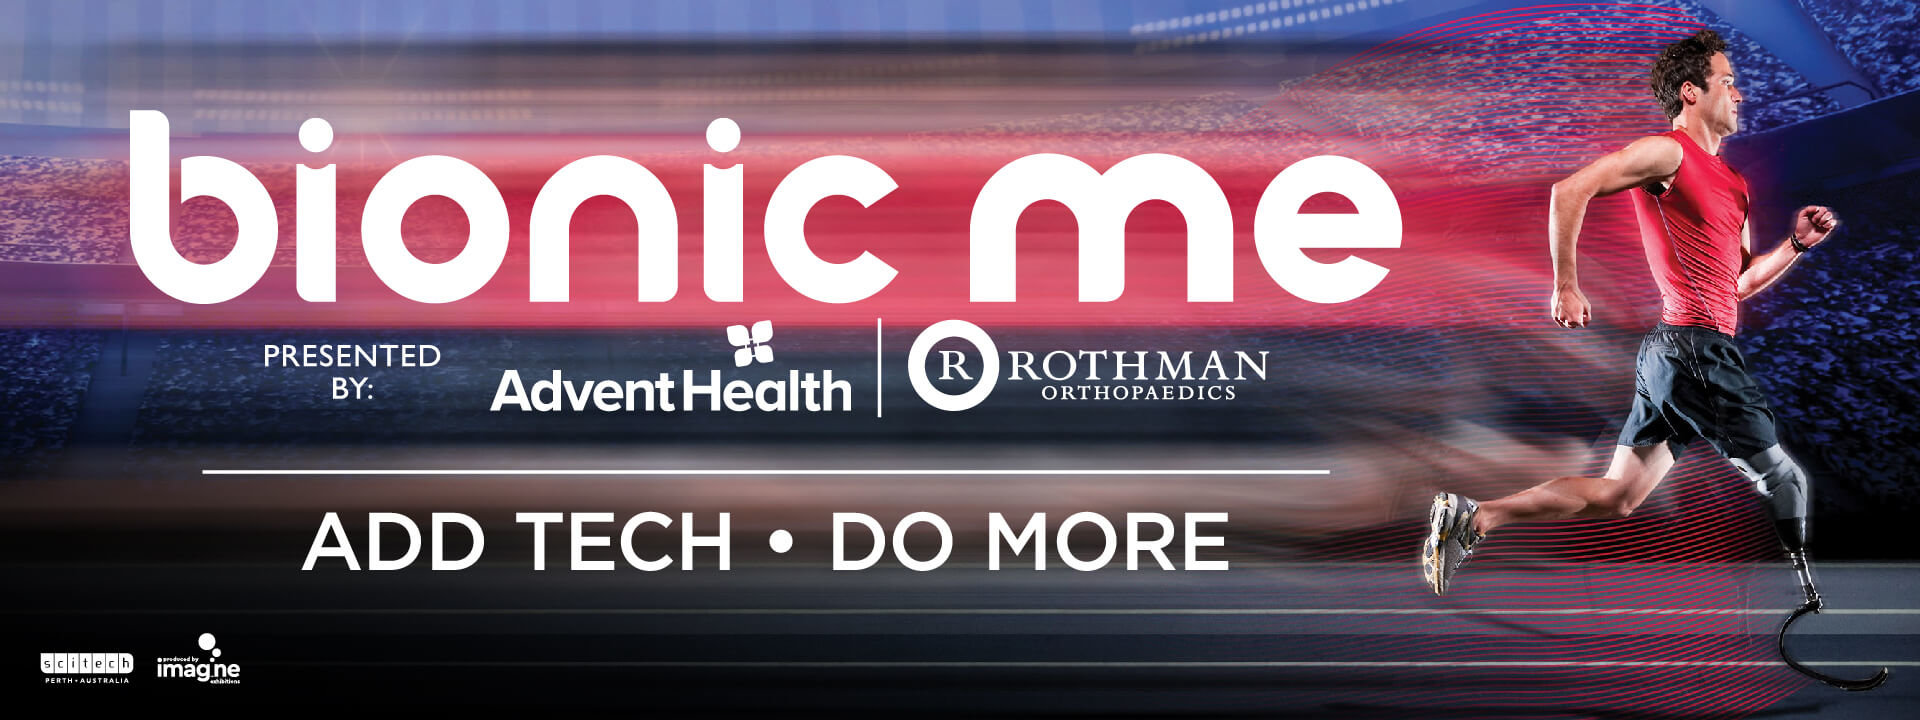 Bionic Me – Presented by AdventHealth and Rothman Orthopaedics: Add Tech - Do More